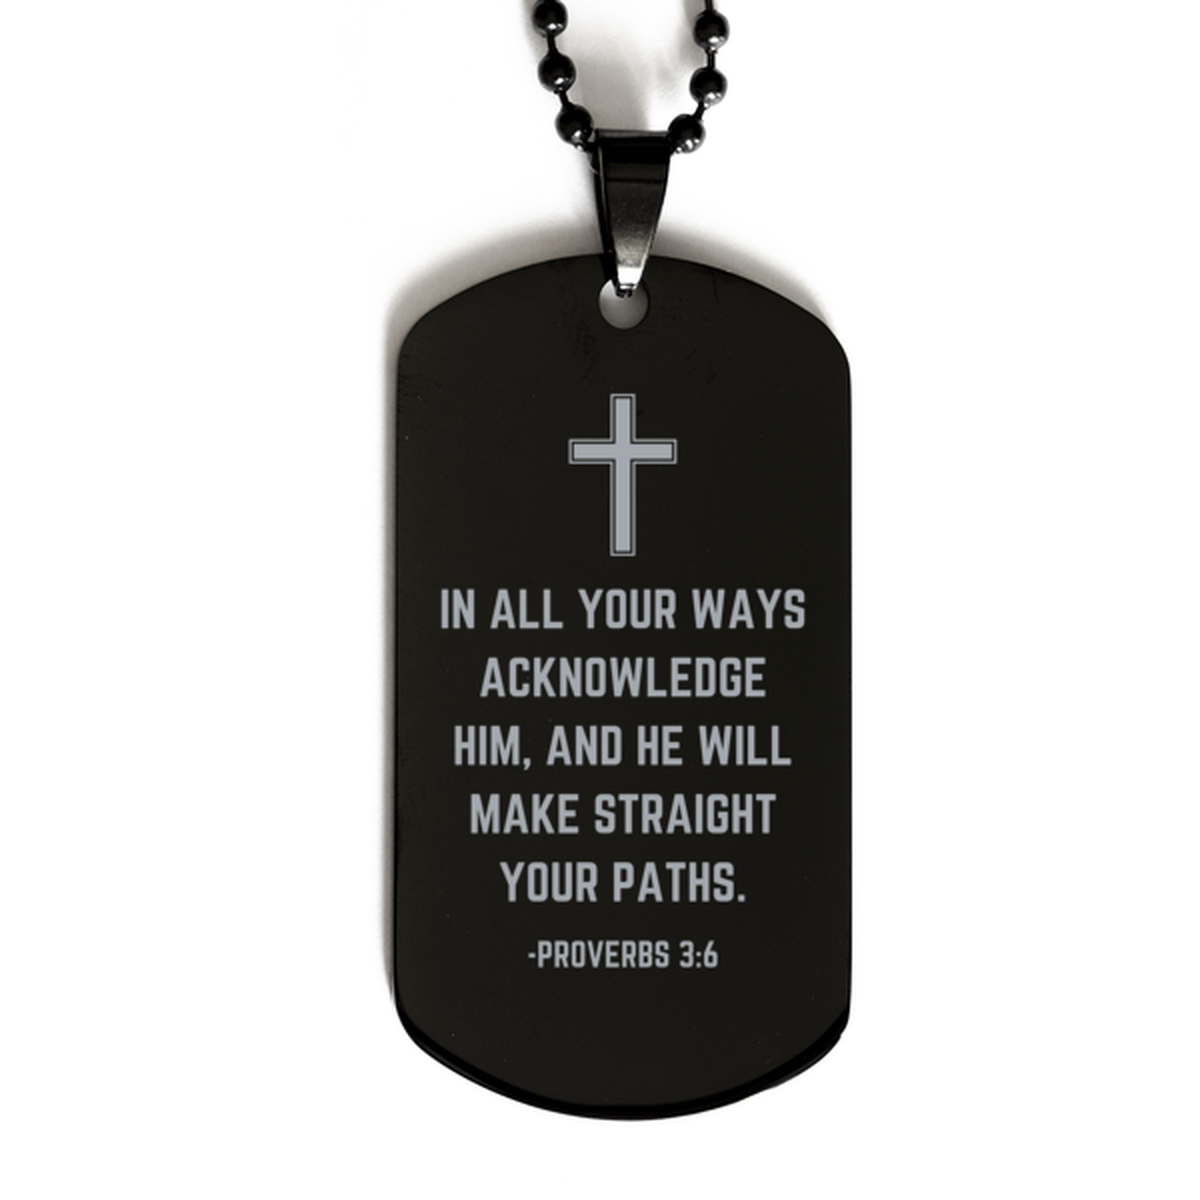 Baptism Gifts For Teenage Boys Girls, Christian Bible Verse Black Dog Tag, In all your ways acknowledge Him, Confirmation Gifts, Bible Verse Necklace for Son, Godson, Grandson, Nephew